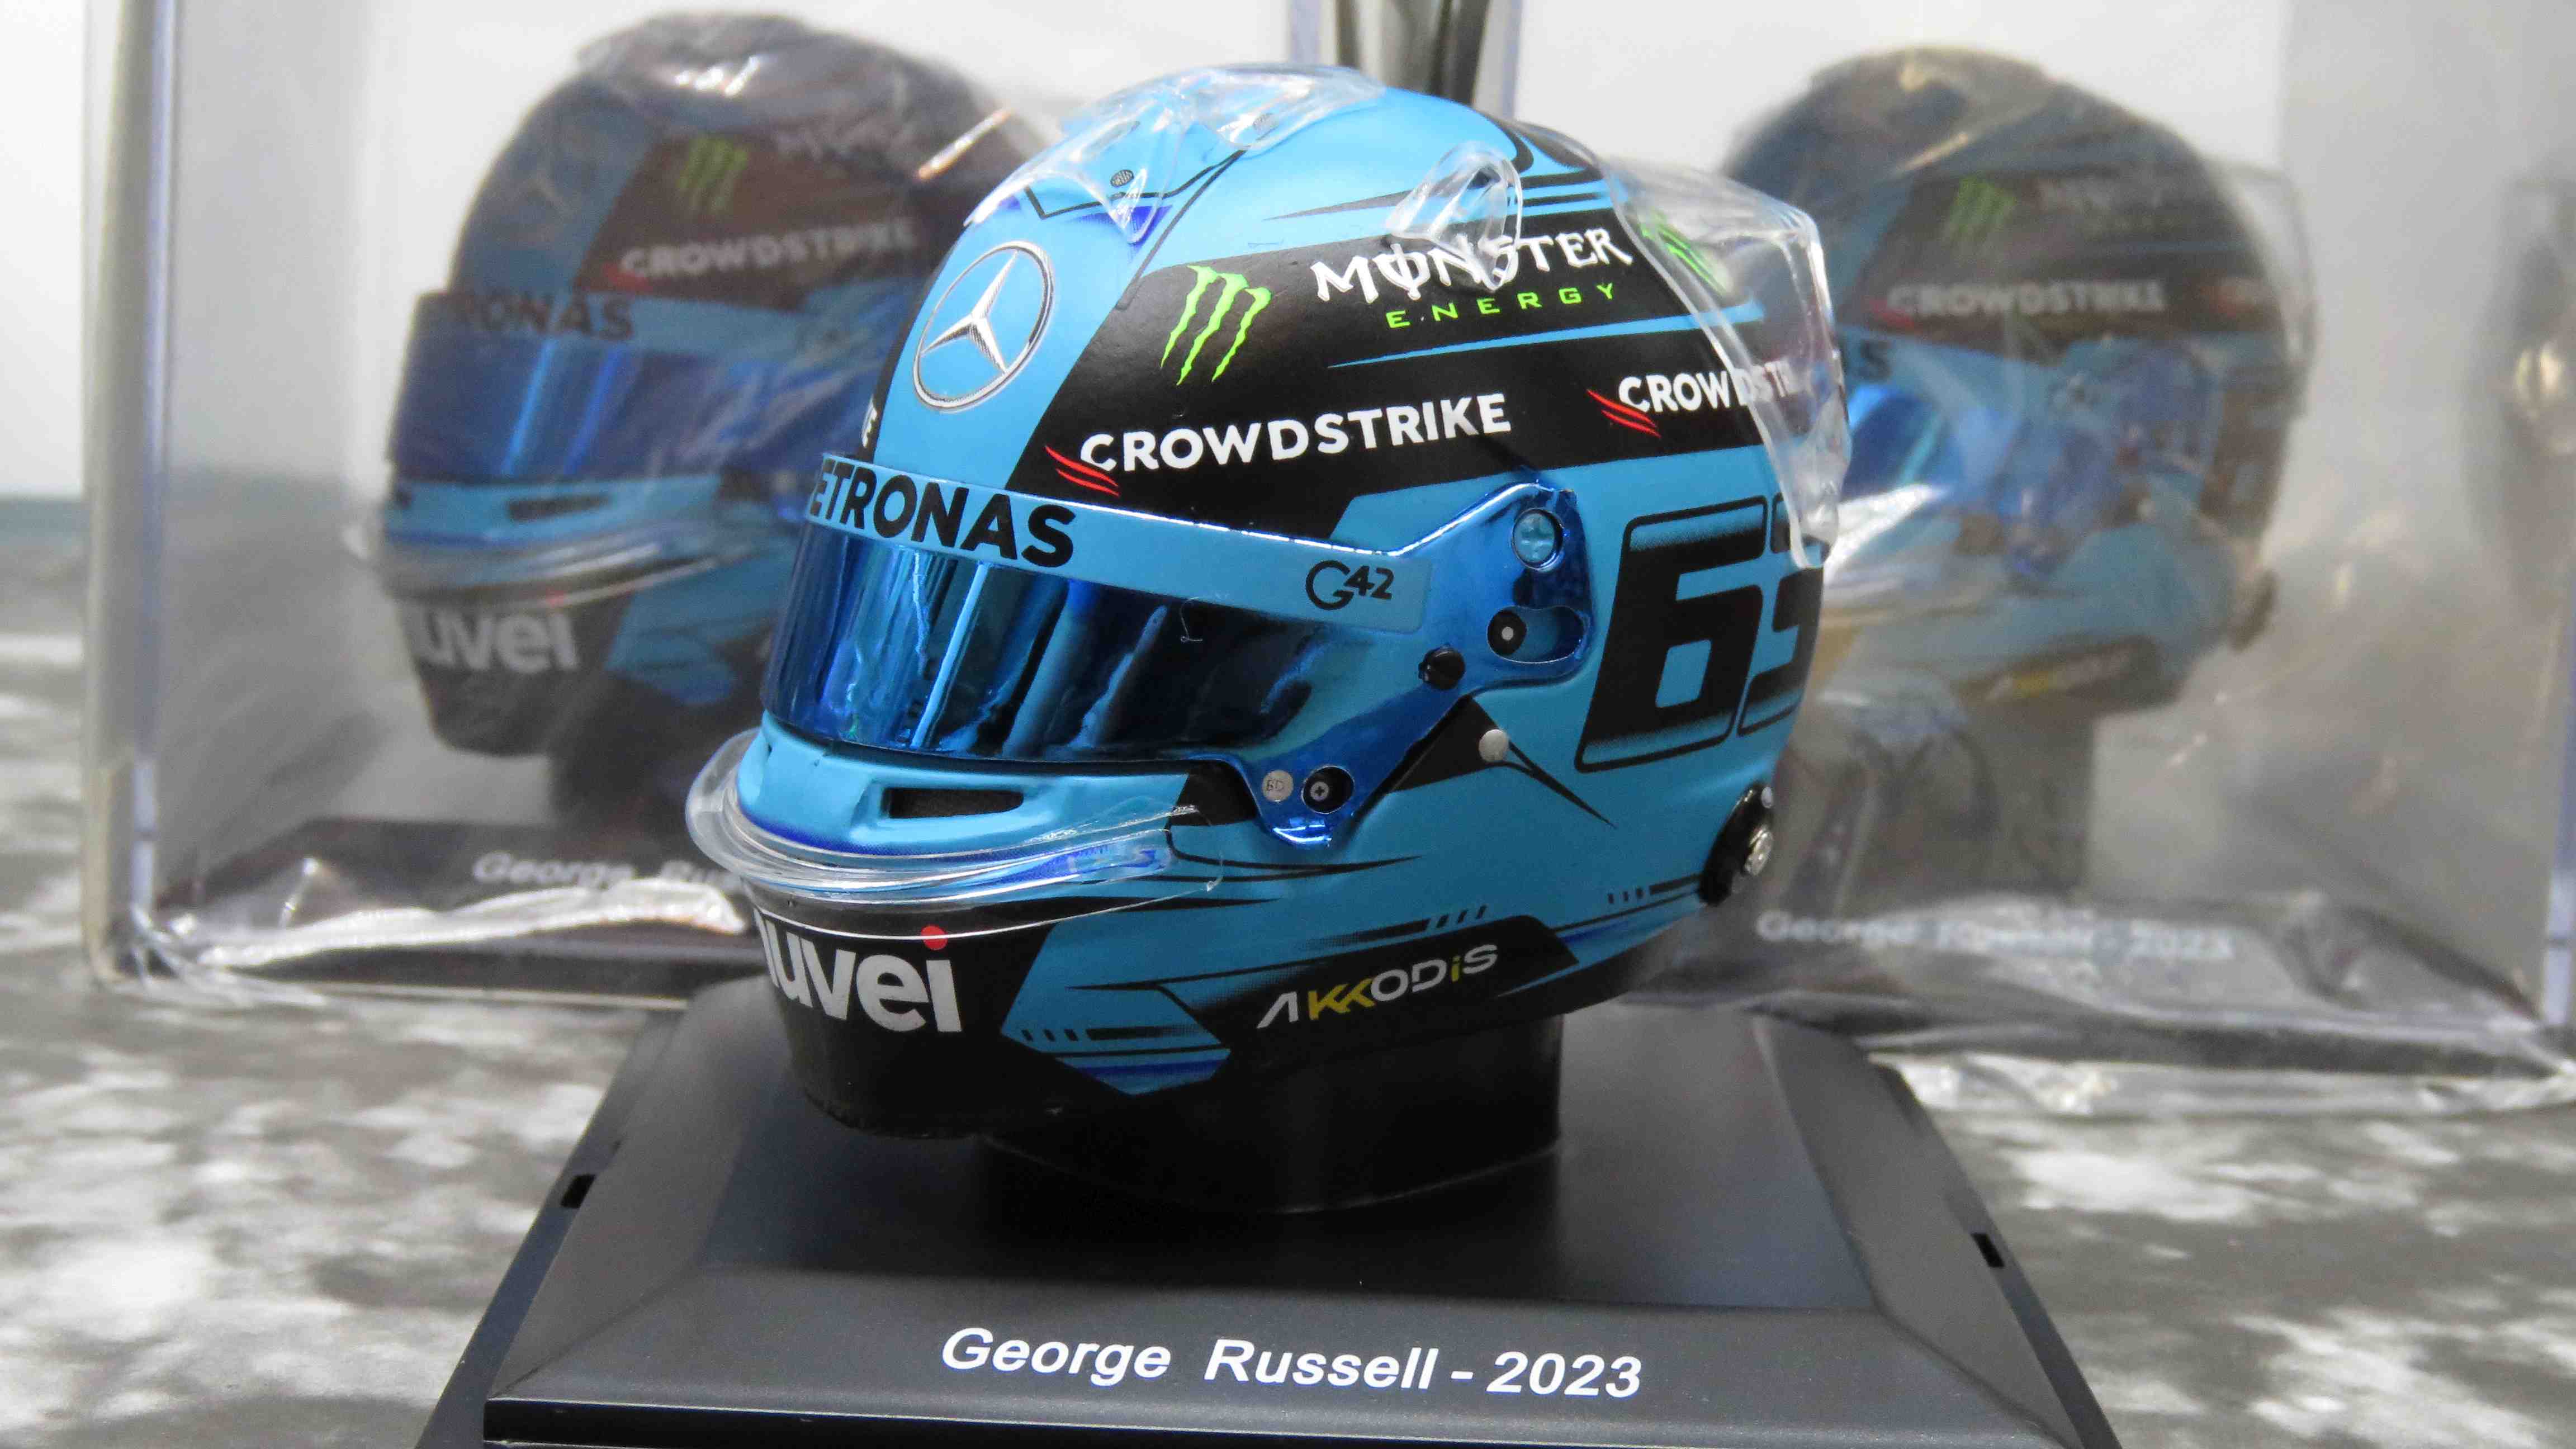 GEORGE RUSSELL - MERCEDES-AMG - 2023 /Spark 5HF088 1:5/